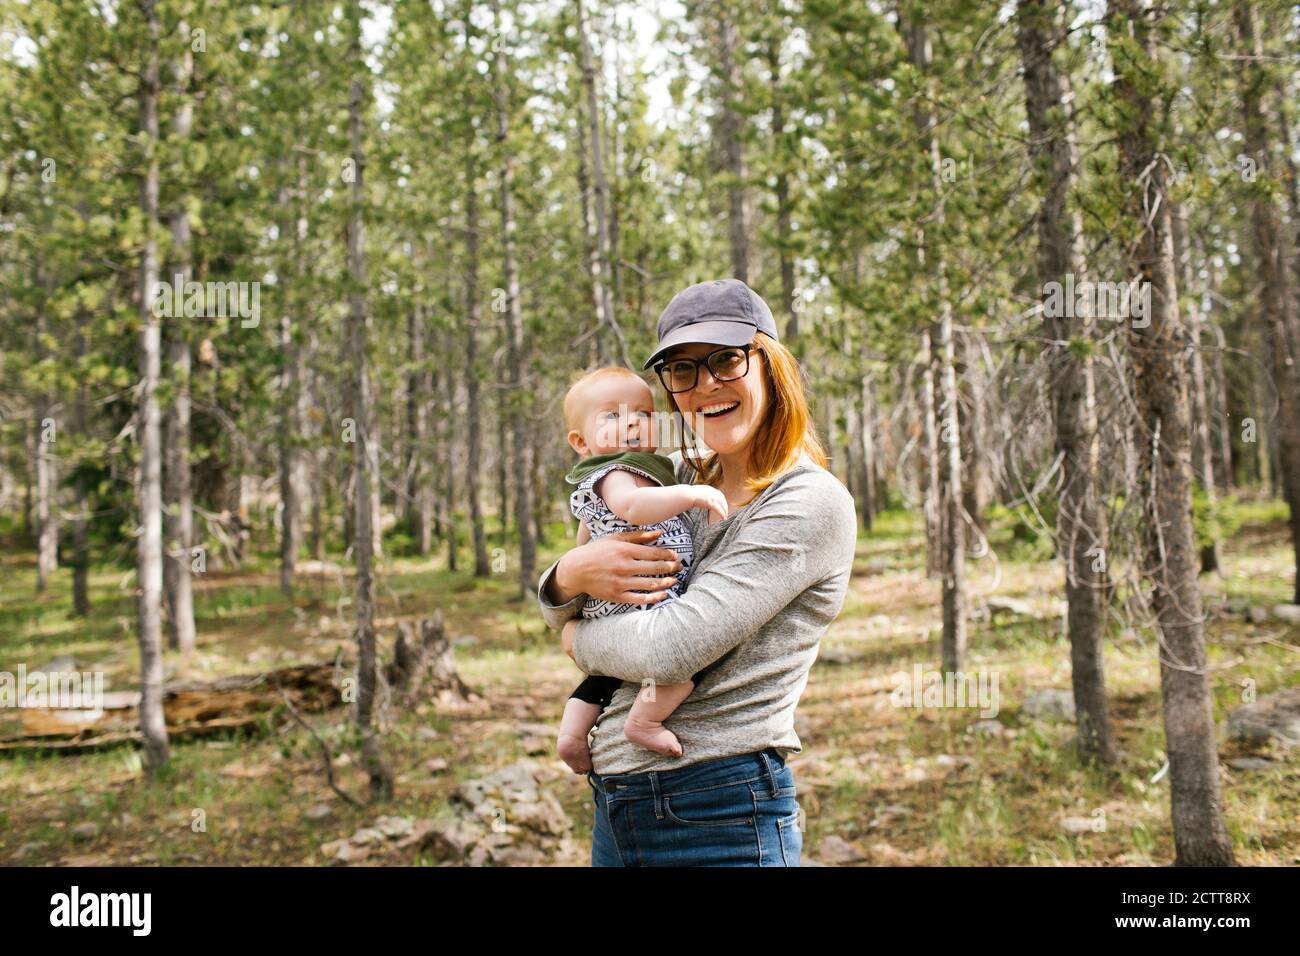 Portrait of smiling woman holding baby son (6-11 months) in forest, Wasatch Cache National Forest Stock Photo